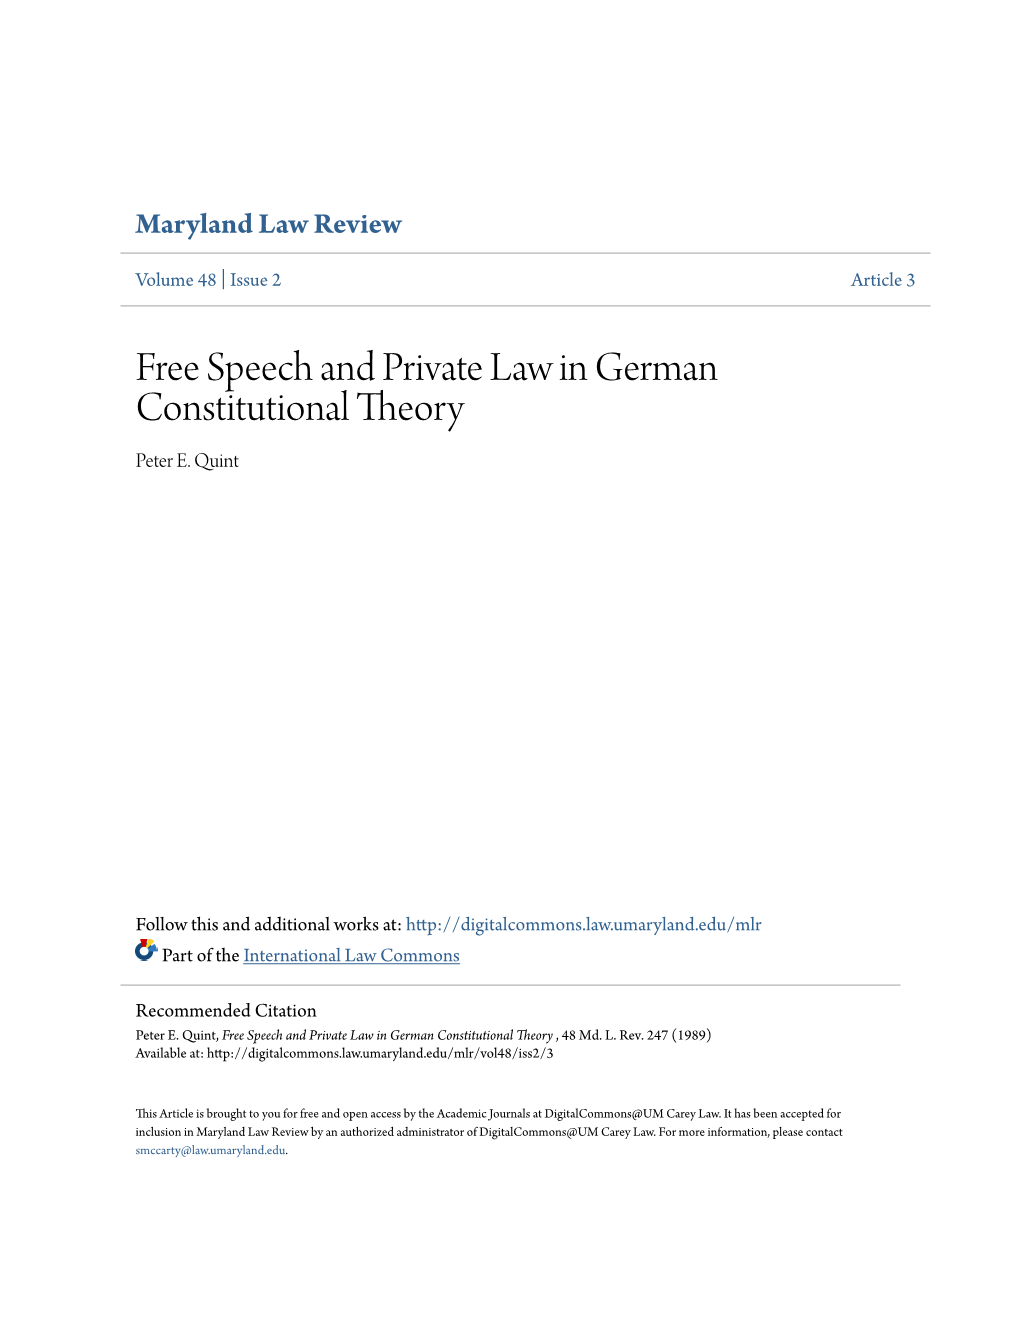 Free Speech and Private Law in German Constitutional Theory Peter E